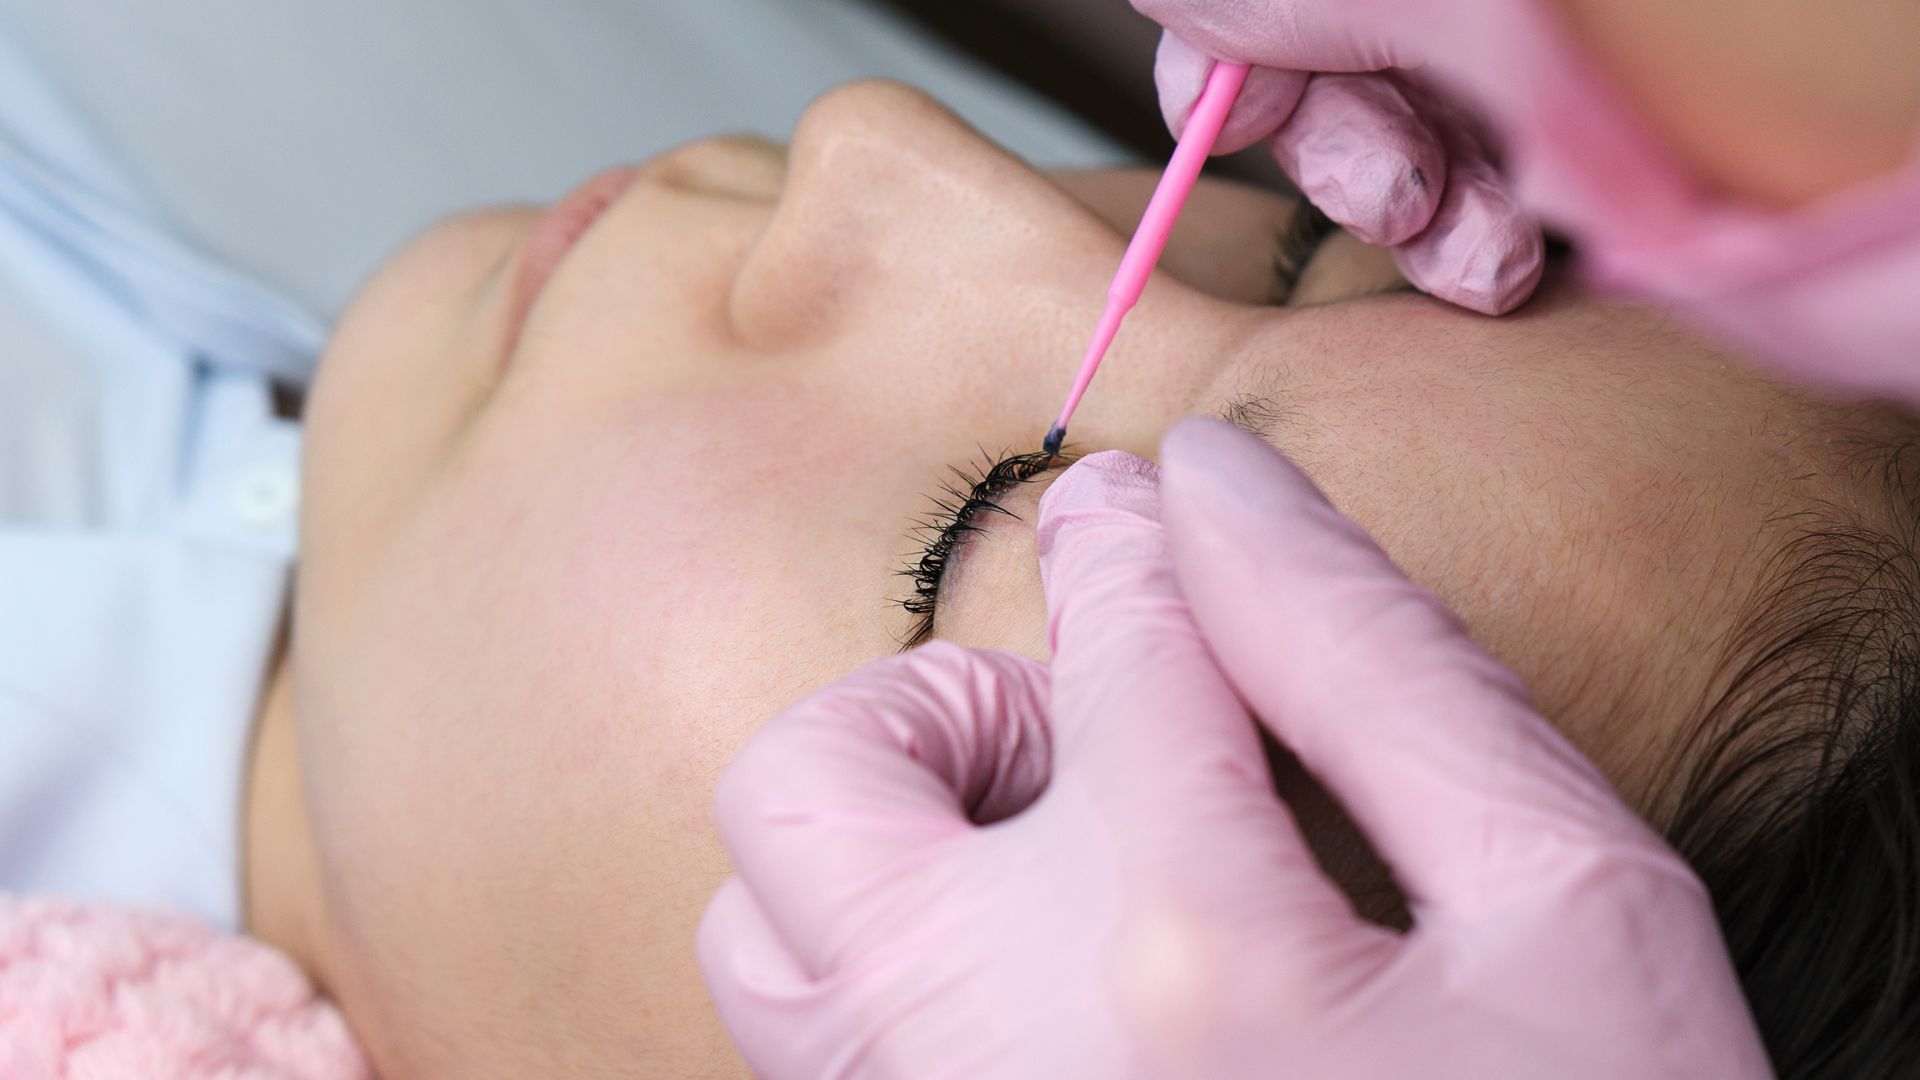 A woman is getting her eyebrows done by a woman wearing pink gloves.